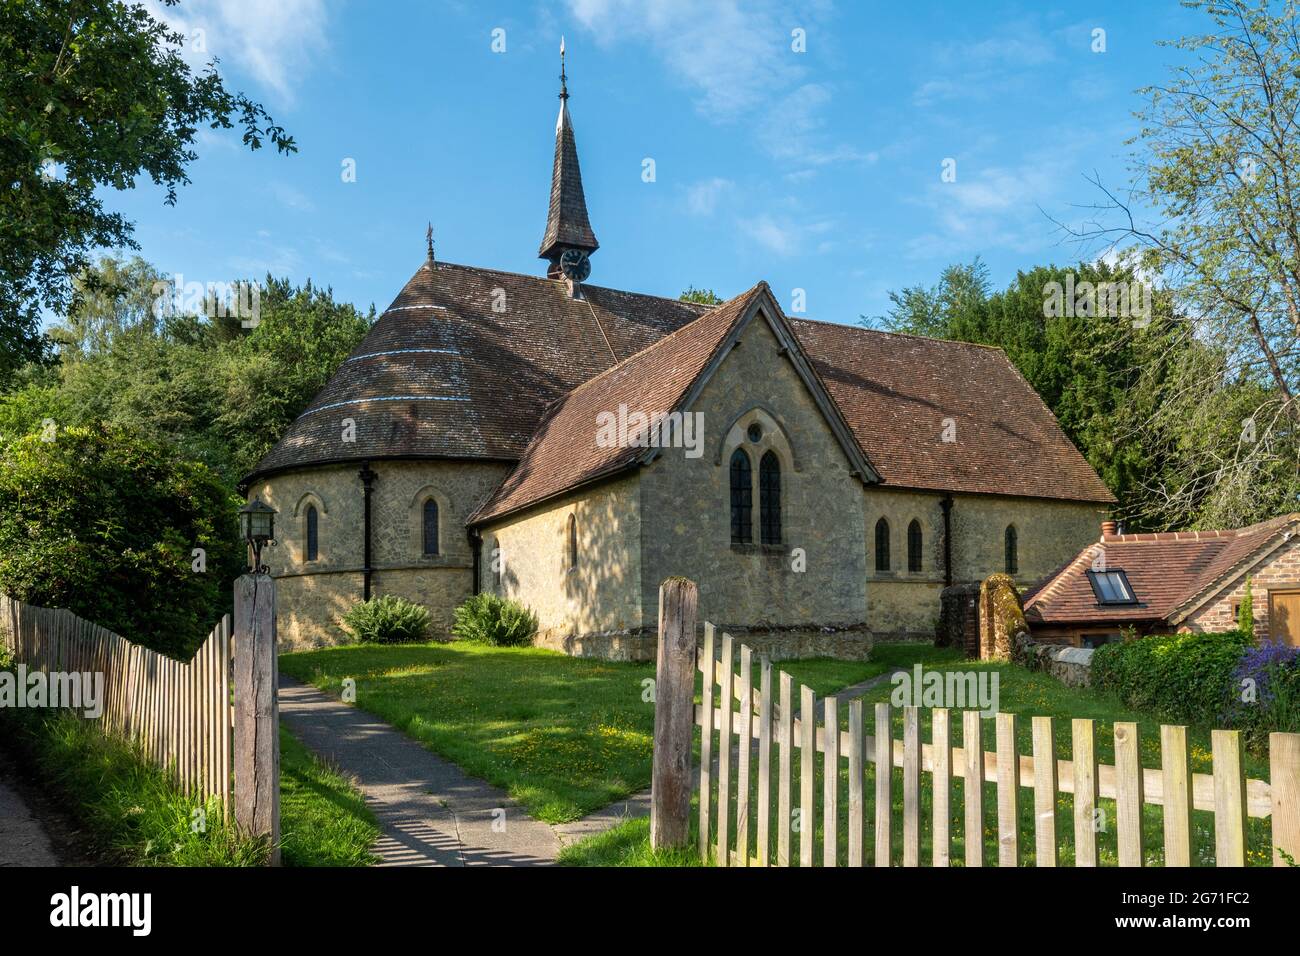 St Marks Church in Peaslake, a pretty village in the Surrey Hills AONB, England, UK Stock Photo